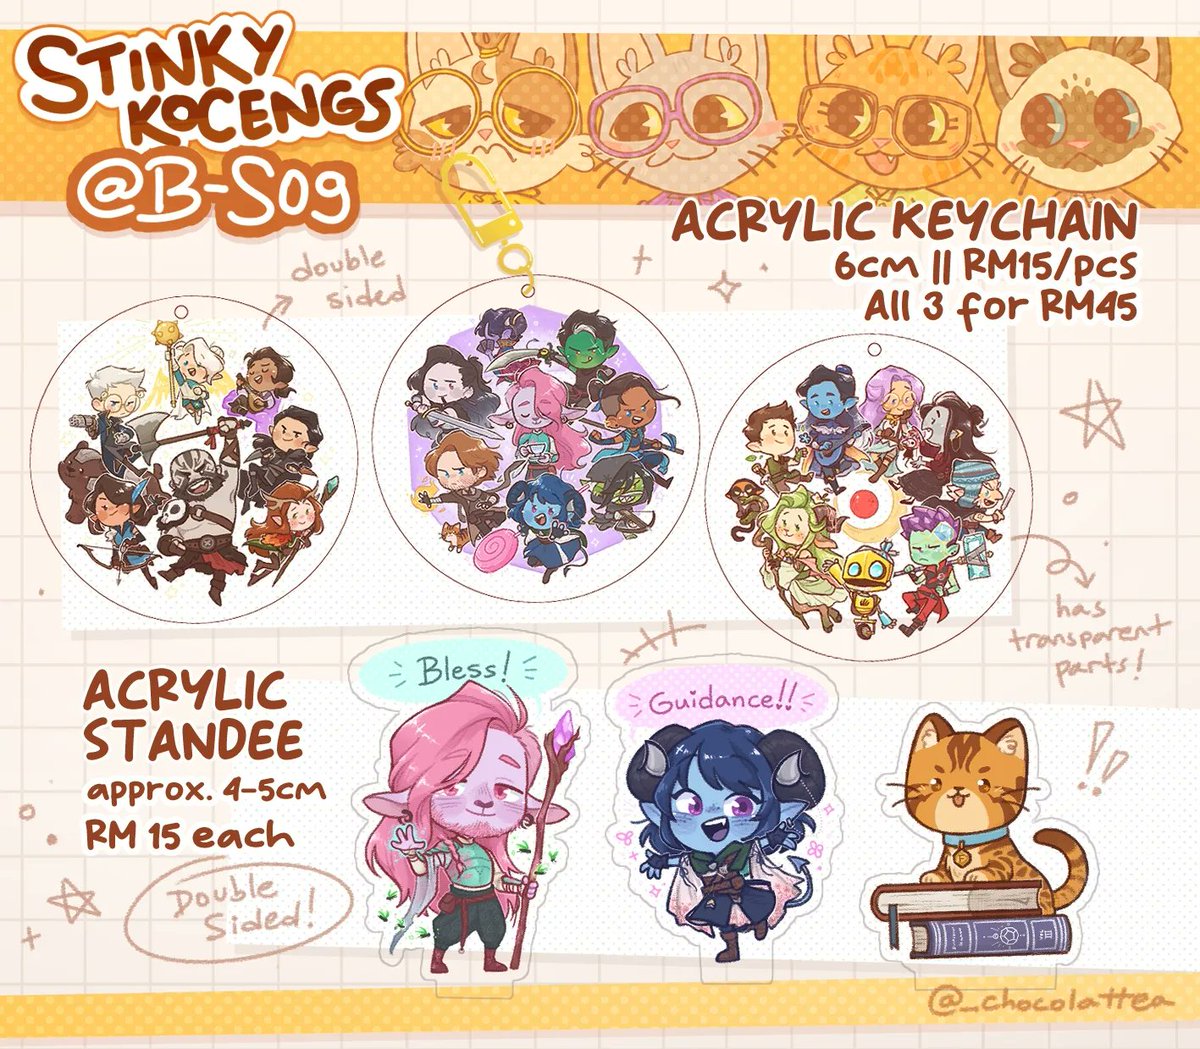 Part 1/2 of my catalogue!

Come drop by to B-S09 Stinky Kocengs to meet me, @pistchachios, @a_liottr, and @dailylouisbella !!!! 🐱🐾✨️ 

#comicfiesta2022 